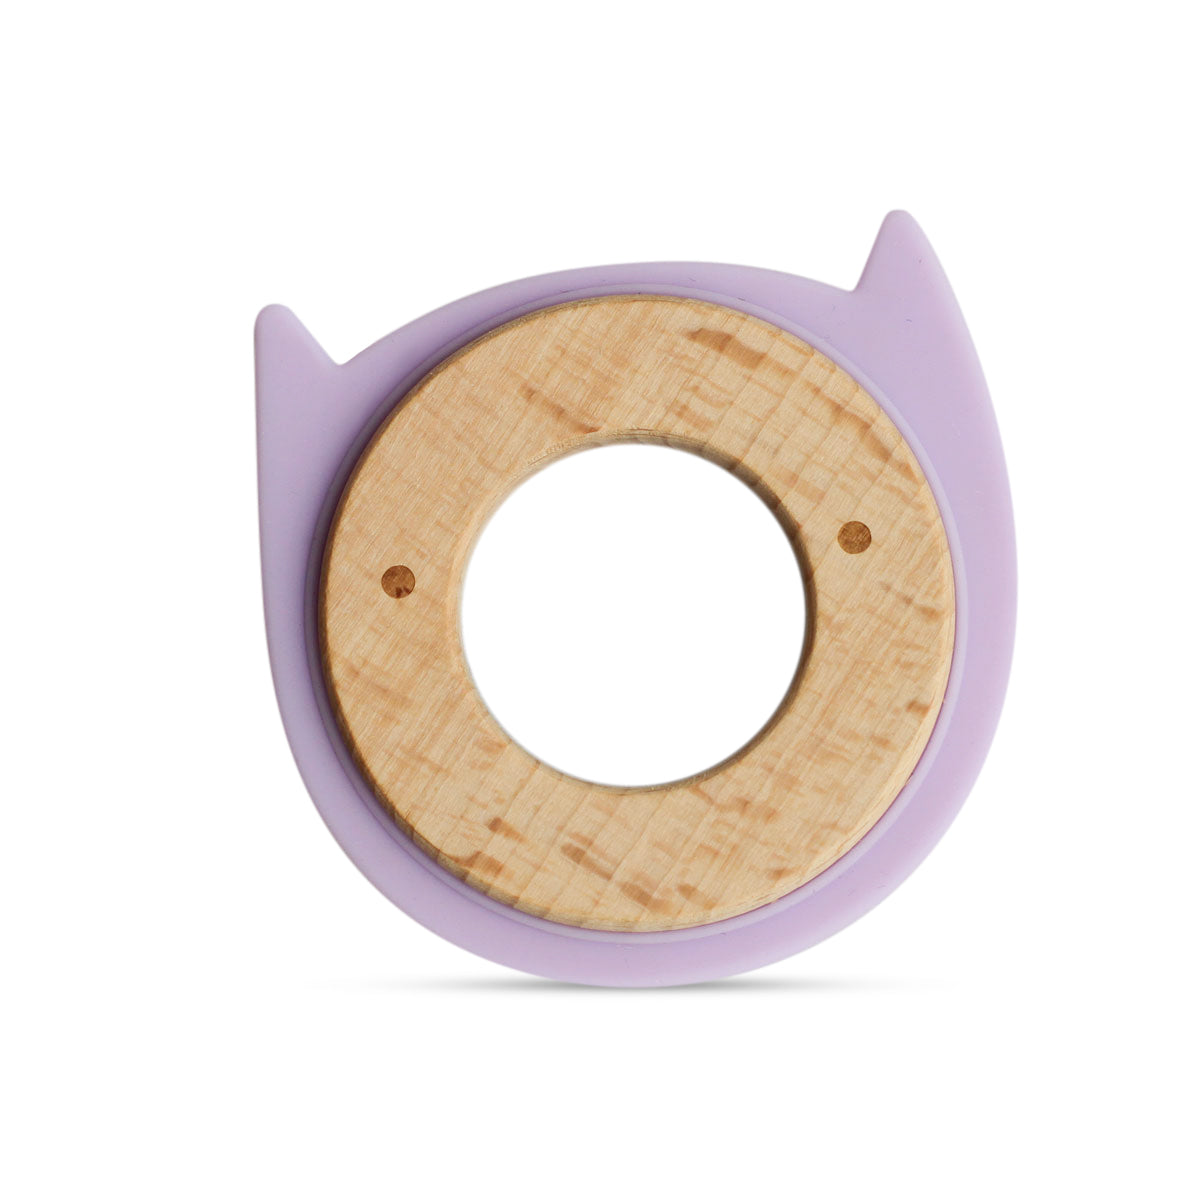 Wood + Silicone Disc Teether Toy - Purple